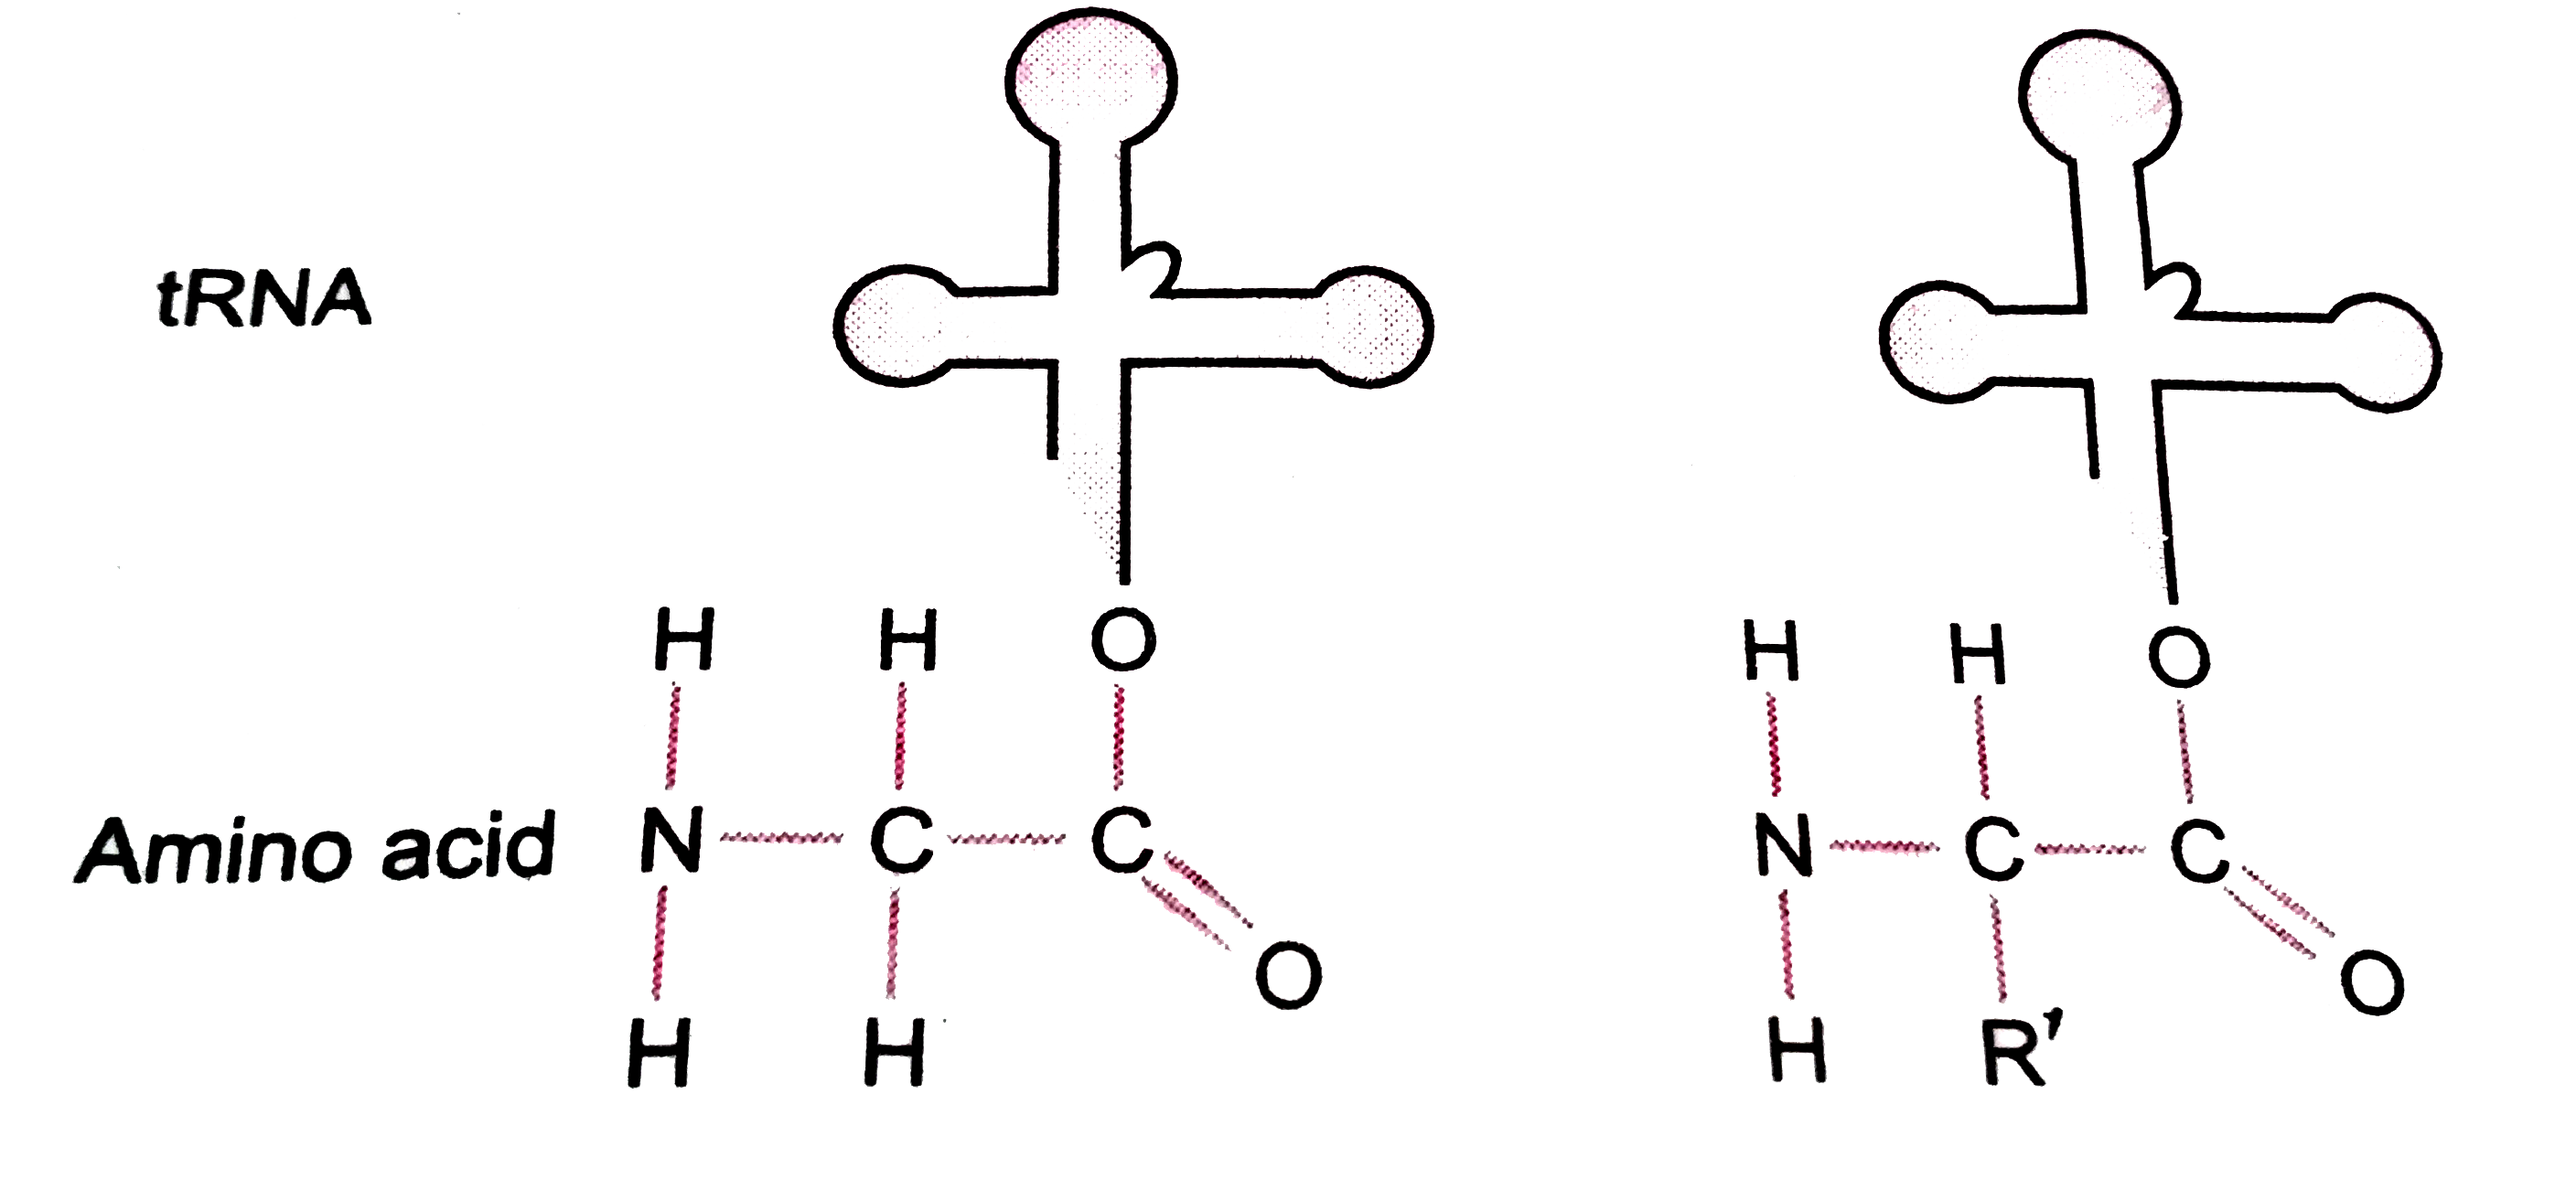 The carboxyl group (-COOH) of one amino acid reacts with an amino group (-NH(2)) of other amino acid to form a peptide bond (-CO-NH). Make a peptide bond between the two amino acids by removing water molecule in the given figure